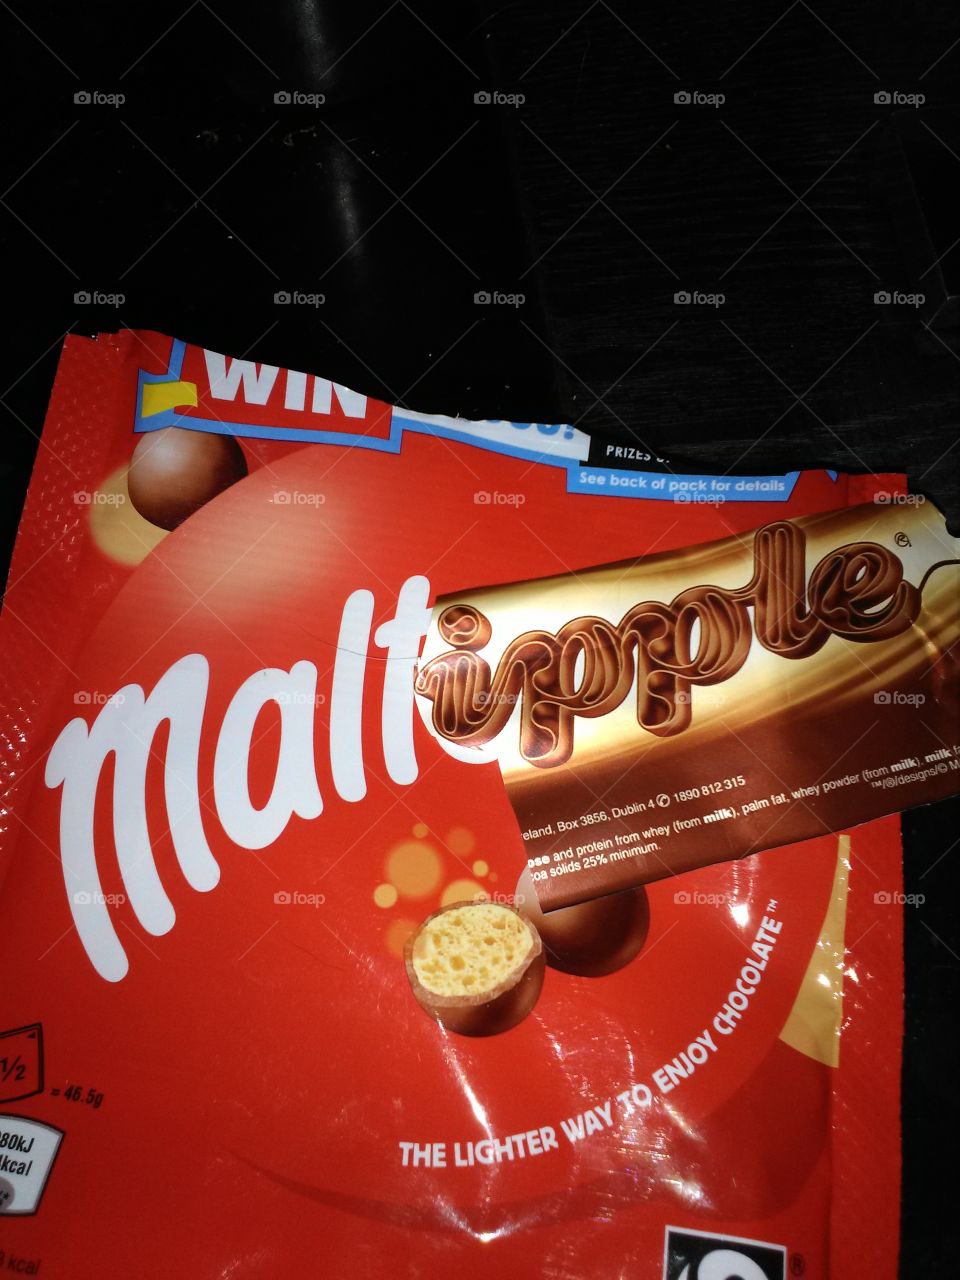 2 of my favourite chocolate bars, but i thought it would be good to have a chocolate maltipple.